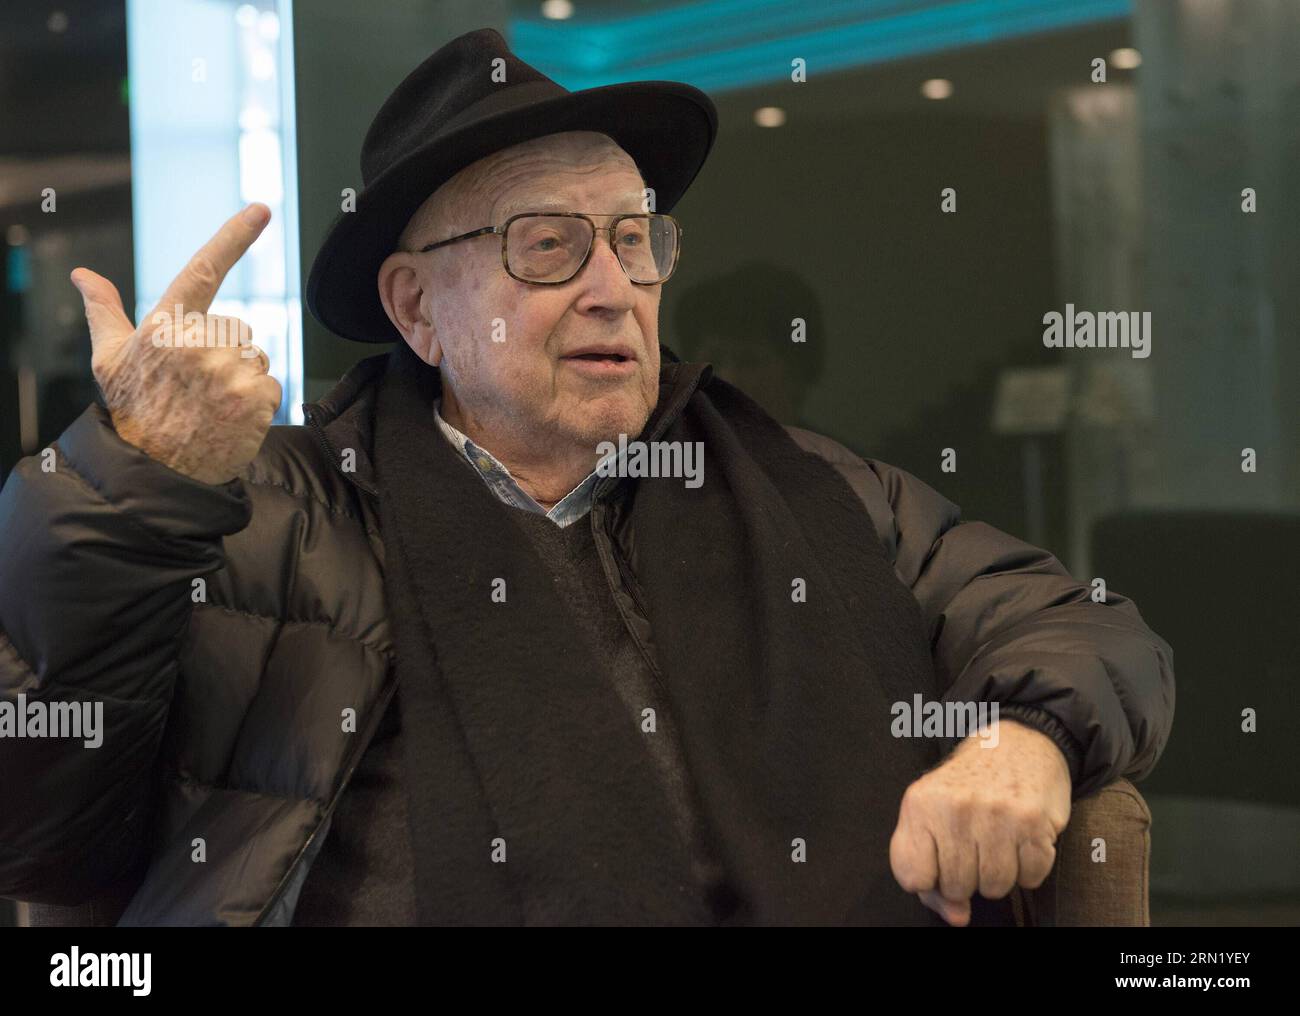 ZAGREB, Jan. 26, 2015 -- Holocaust survivor Branko Lustig speaks during an interview with Xinhua News Agency in Zagreb, capital of Croatia, Jan. 26, 2015. Branko Lustig is a famous Croatian film producer, winner of two Oscar Awards for Schindler s List and Gladiator. During World War II, he was imprisoned for two years in Auschwitz and Bergen-Belsen as a child. He will join Croatian delegation to attend an official ceremony marking the 70th anniversary of the liberation of the KL Auschwitz Concentration Camp in the former Auschwitz-Birkenau camp in Poland on Jan. 26. The day is also the Intern Stock Photo